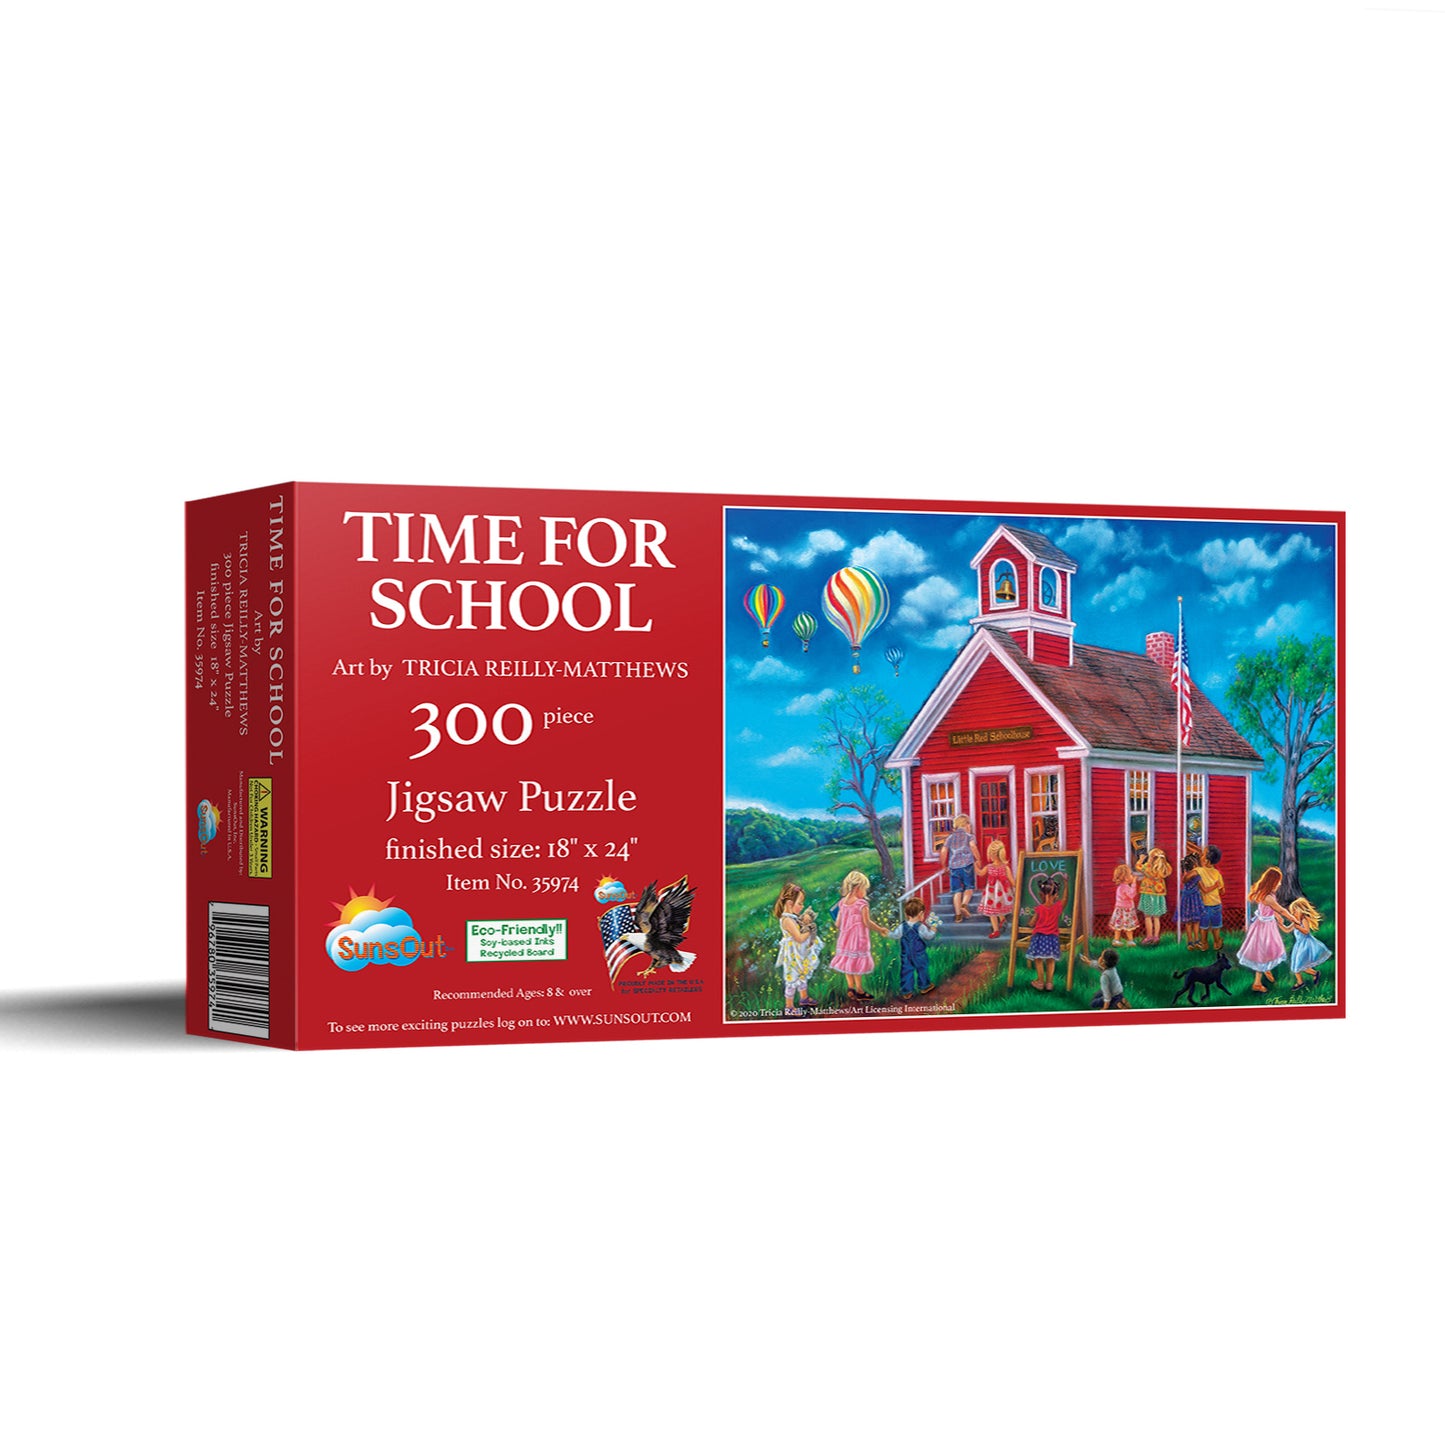 Time for School - 300 Piece Jigsaw Puzzle